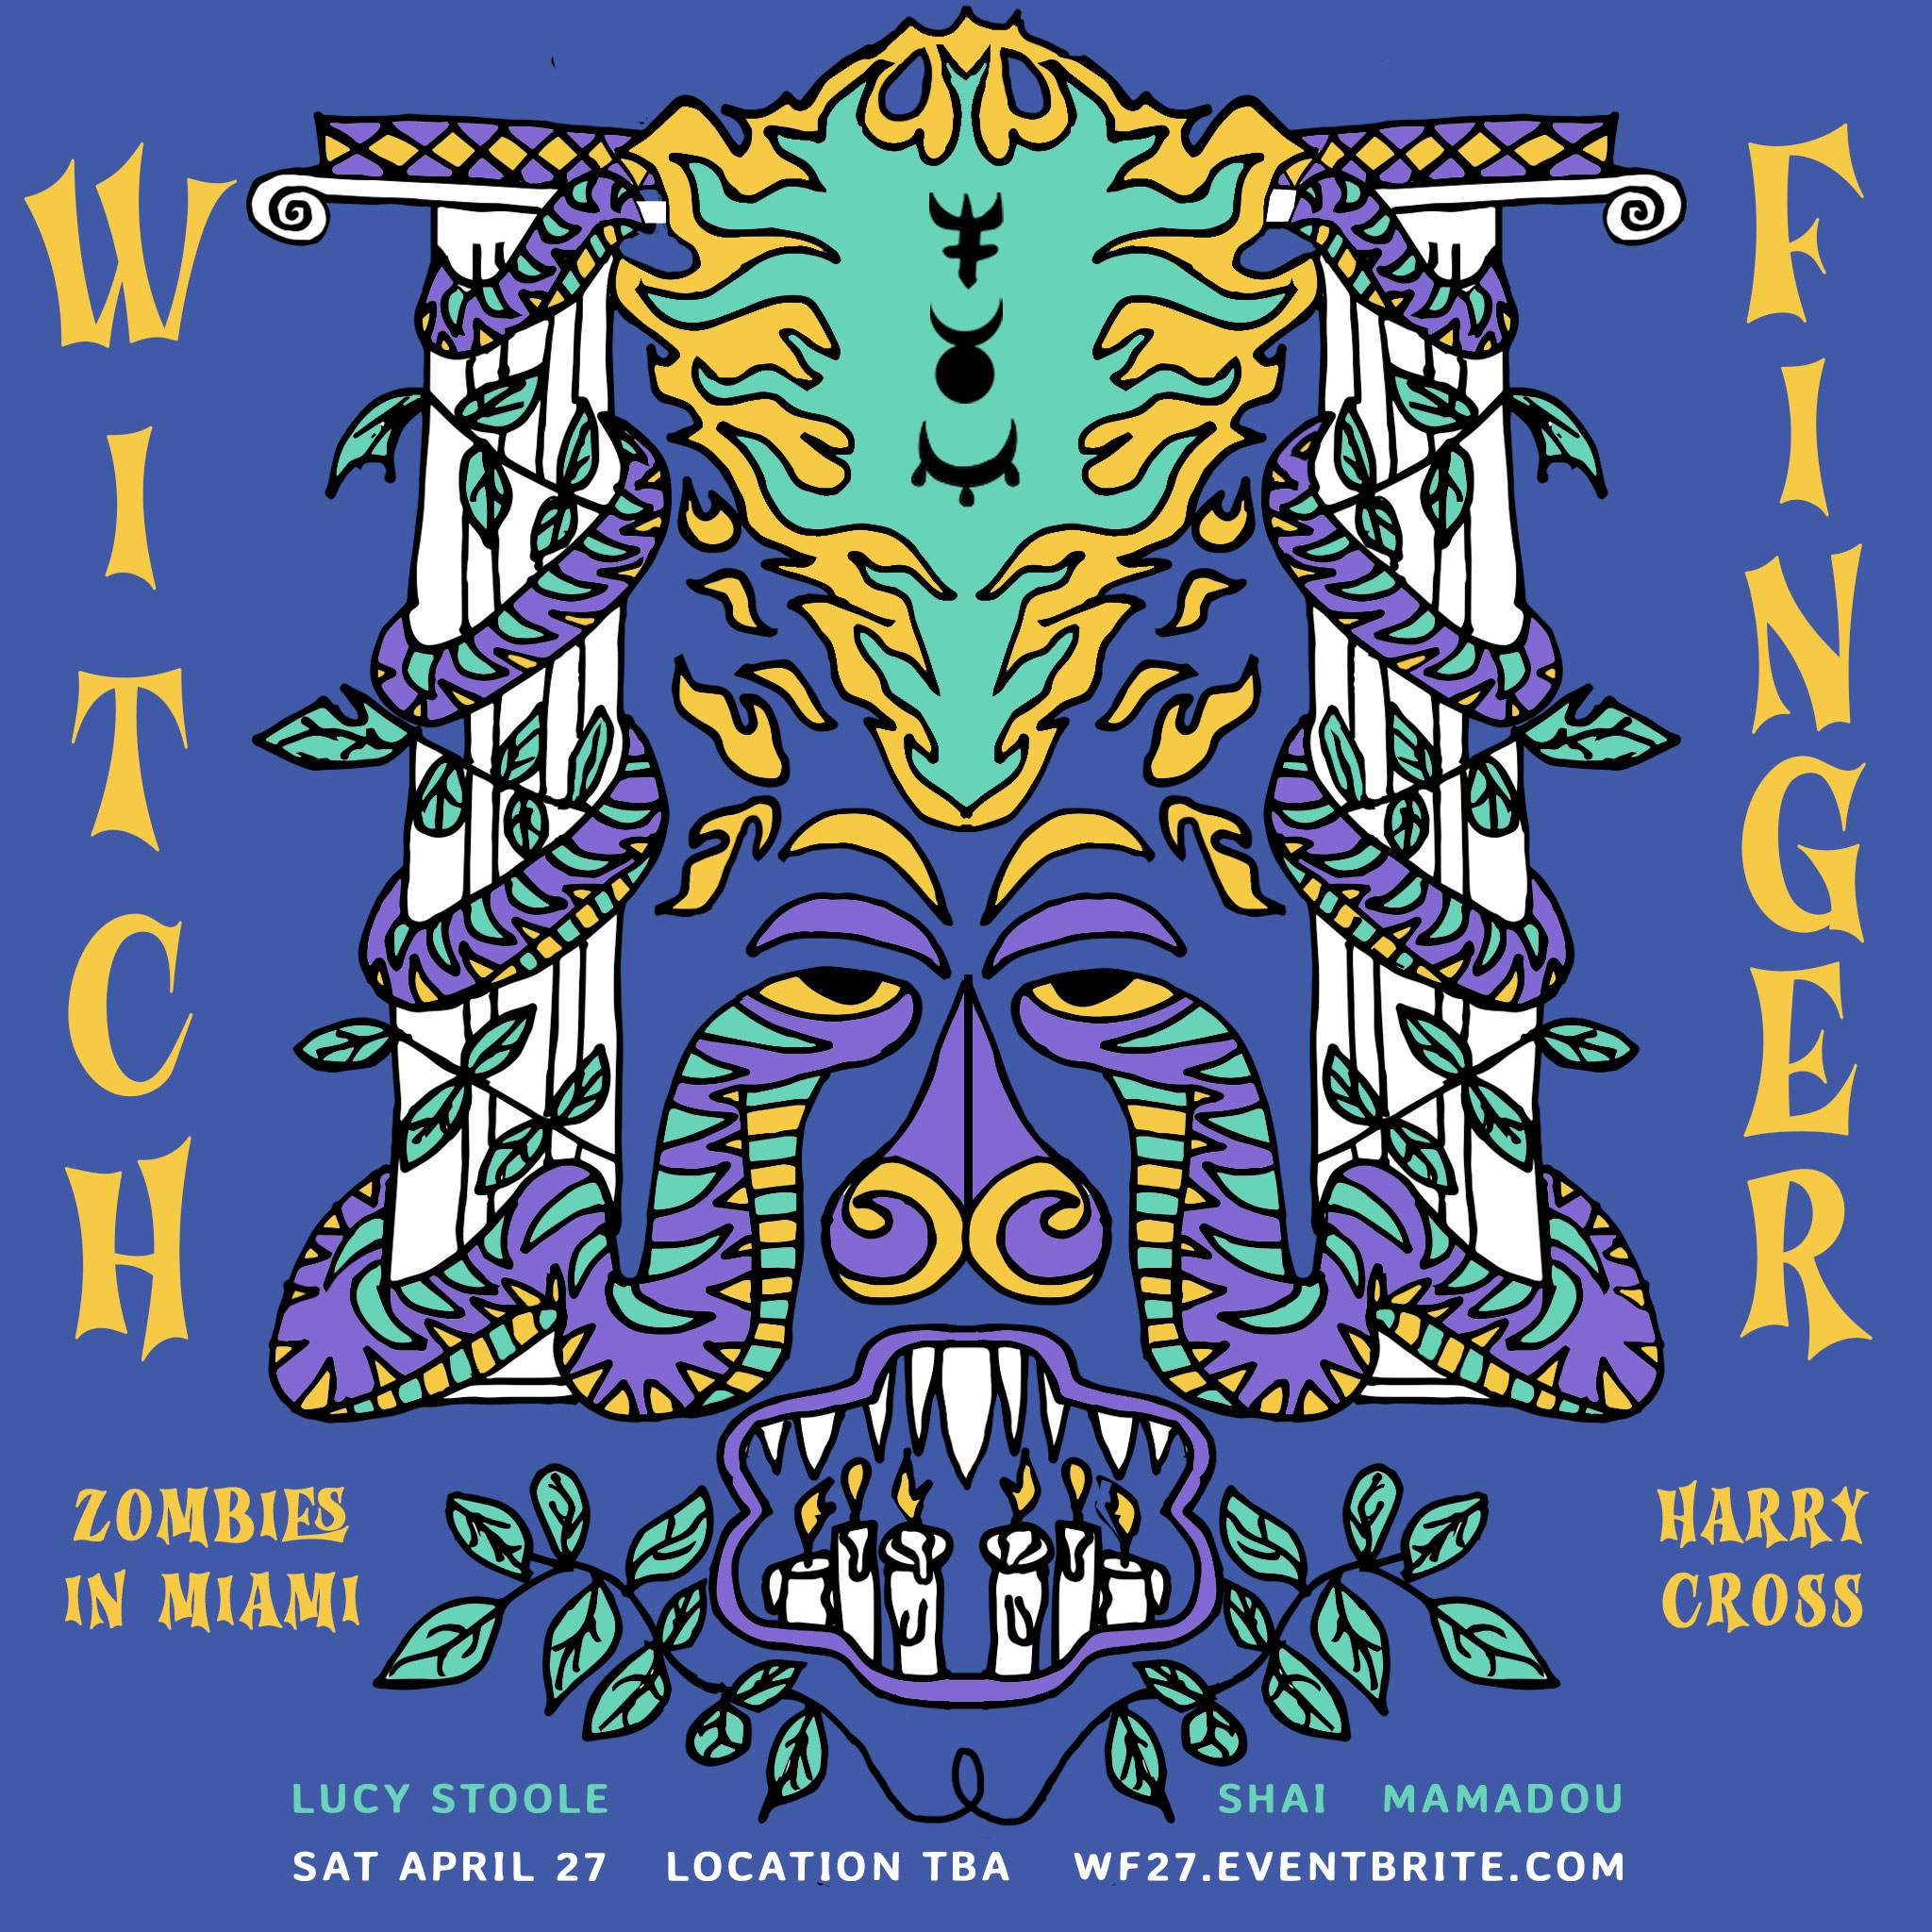 Witch Finger with Zombies In Miami, Harry Cross - Página frontal